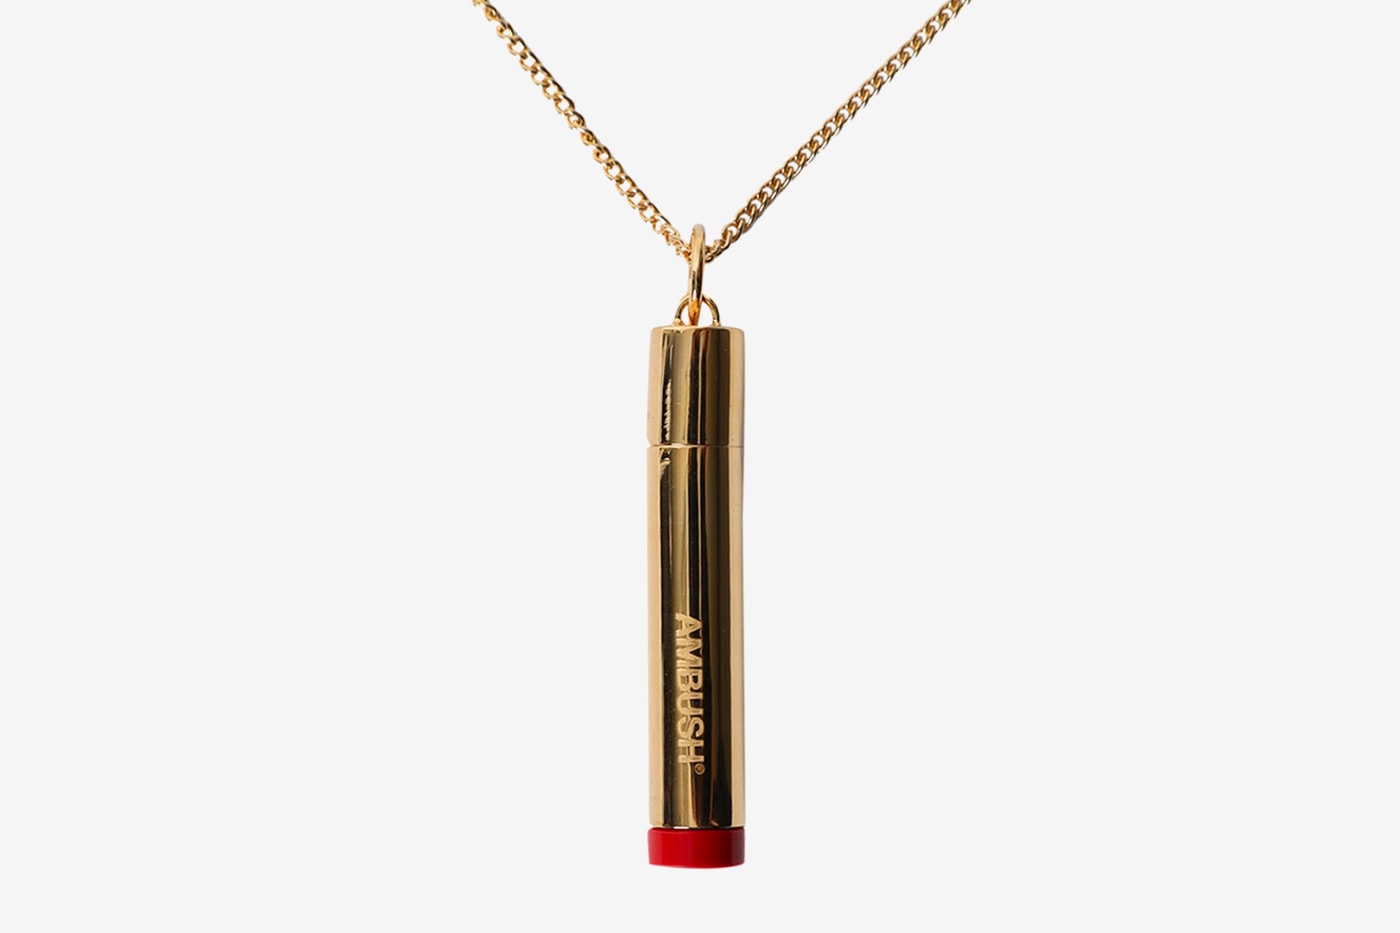 AMBUSH Pill Case Necklace Gold blue red release the webster yoon verbal accessories jewelry 